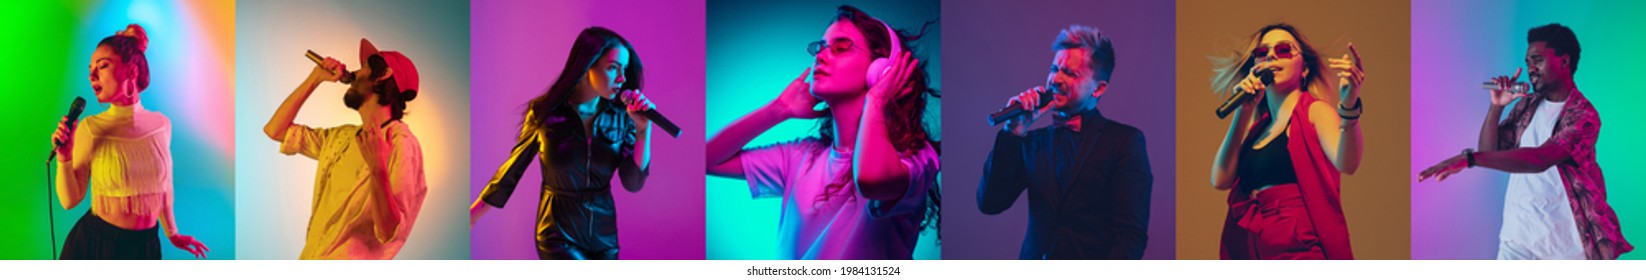 Singers againts dancers. Portraits of different models on multicolored background in neon light. Flyer, collage made of 7 models. Concept of emotions, facial expression, sales, ad and music. - Shutterstock ID 1984131524